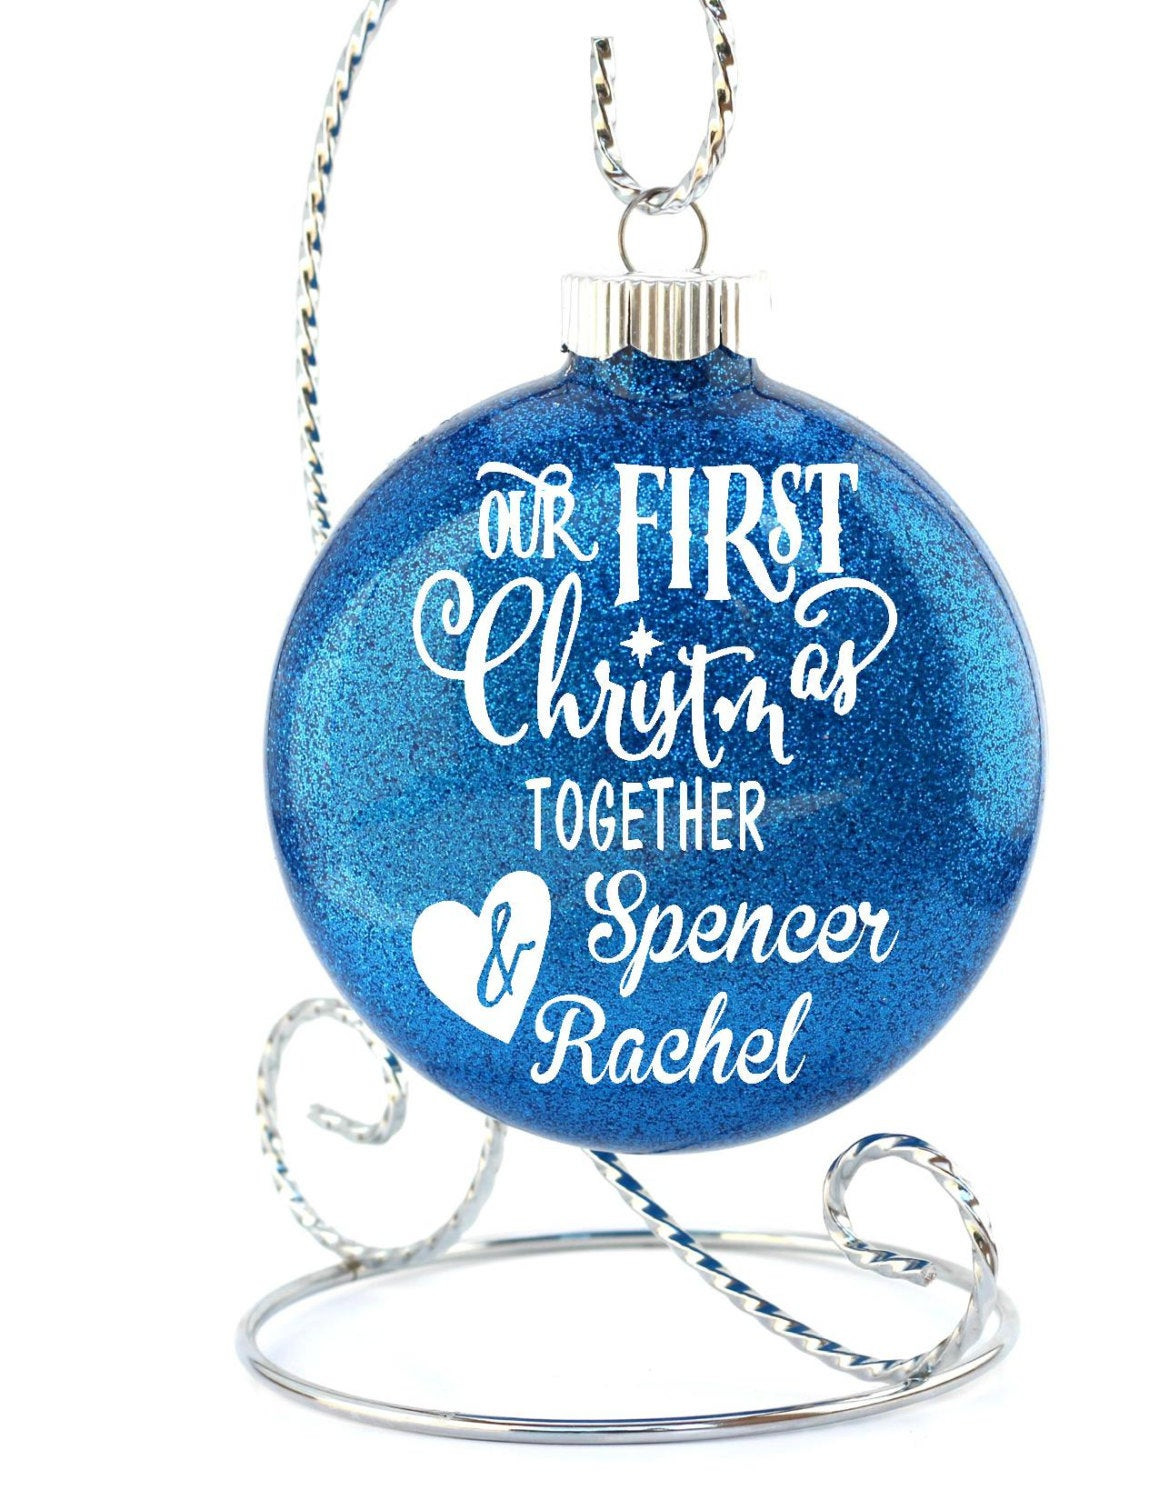 First Christmas Together Gift Ideas
 Our First Christmas To her Couples Ornament Ornament